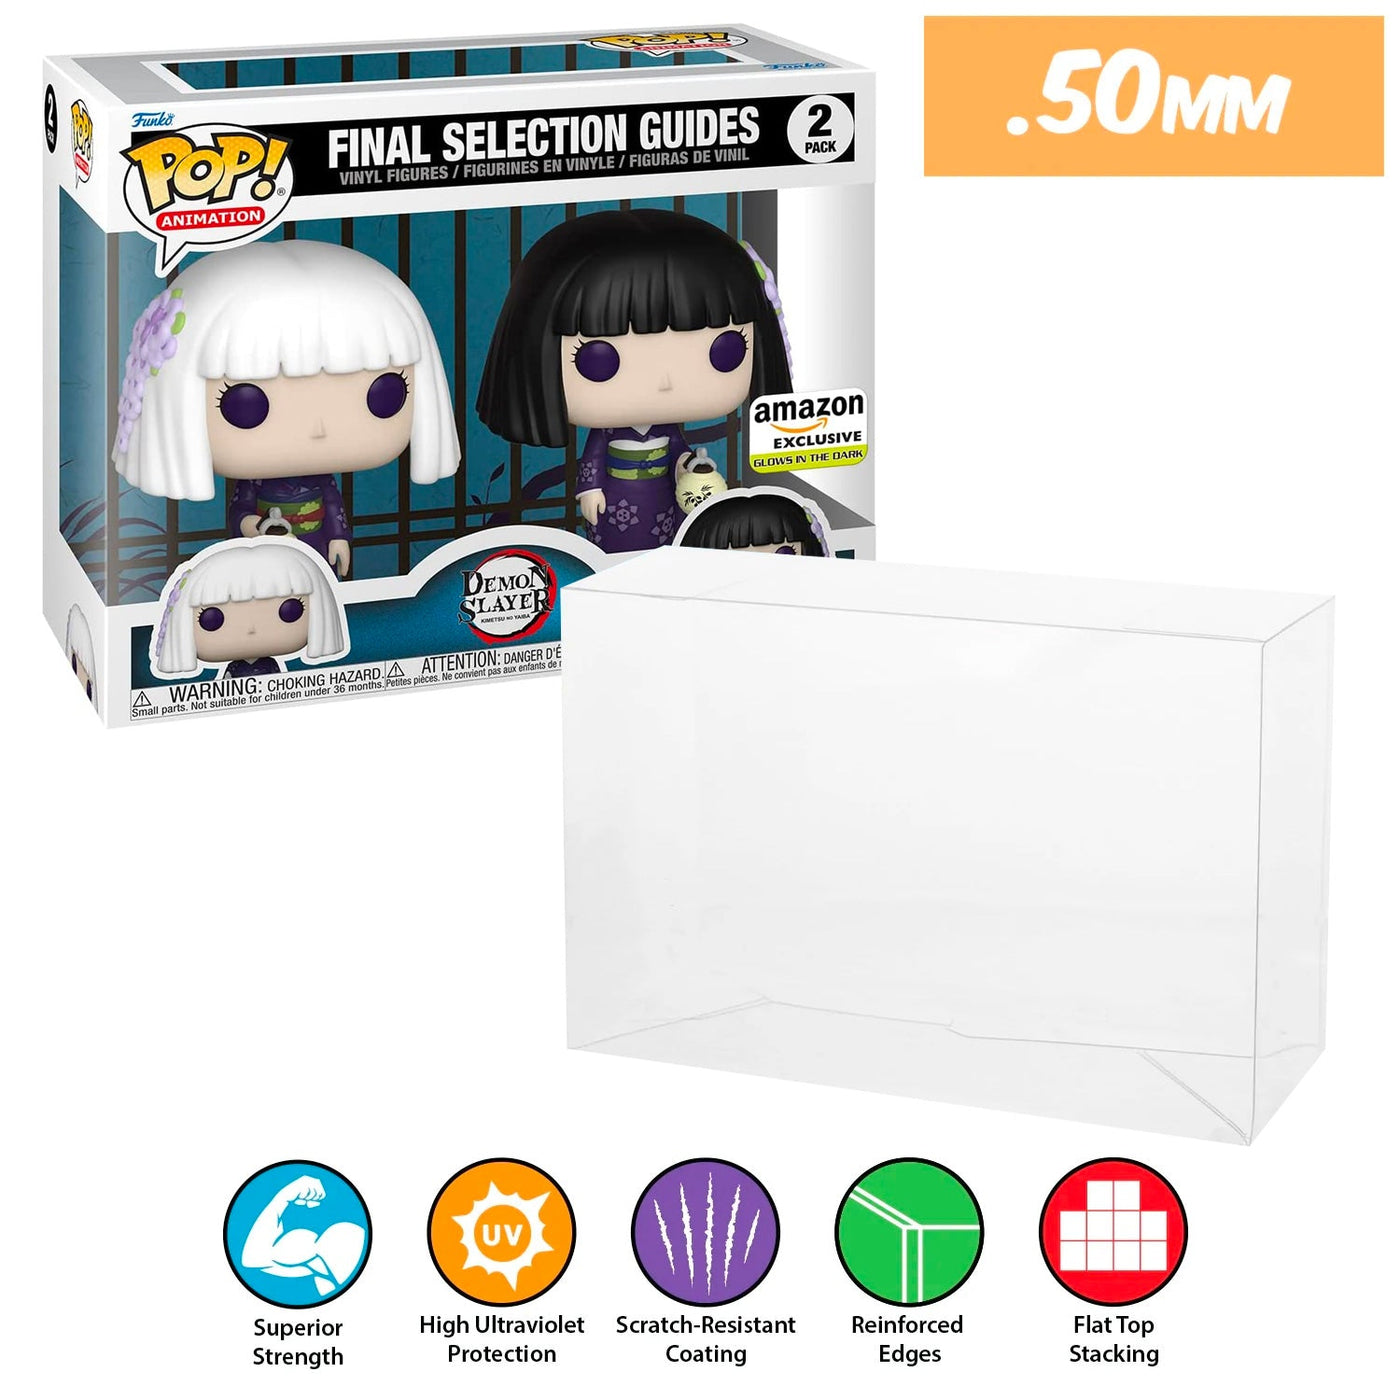 Funko POP! 2 Pack Demon Slayer Final Selection Guides Glow in the Dark Pop Protector Size CONFIRMED!